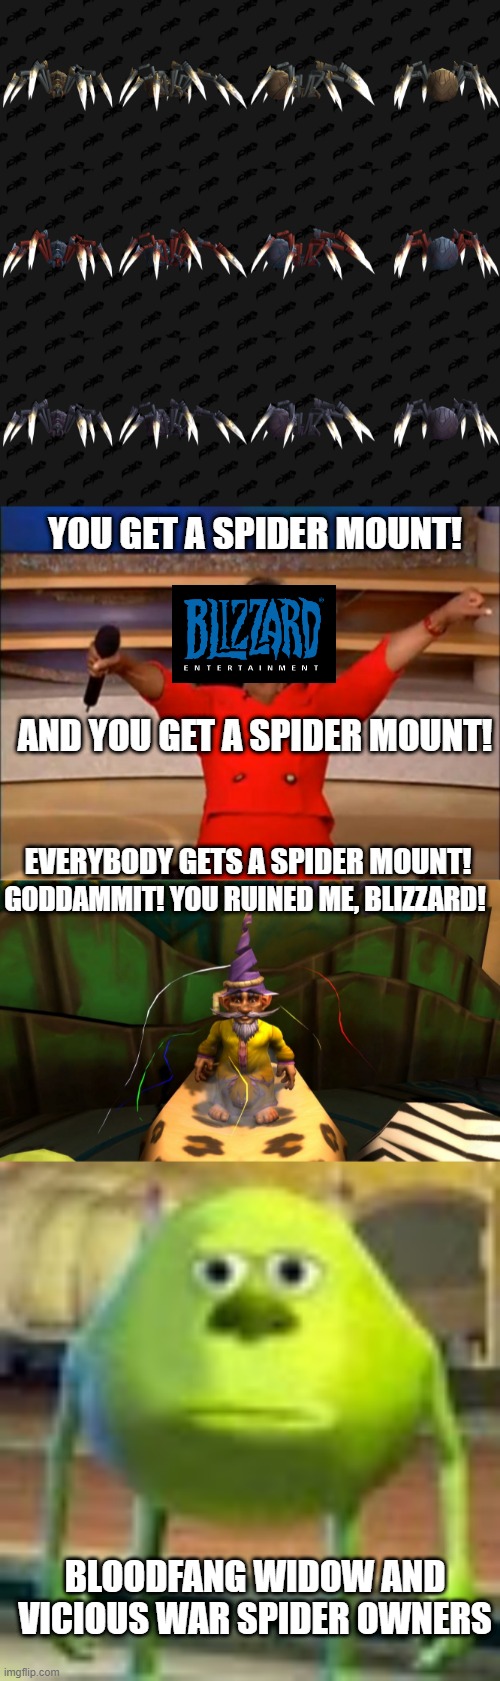 YOU GET A SPIDER MOUNT! AND YOU GET A SPIDER MOUNT! EVERYBODY GETS A SPIDER MOUNT! GODDAMMIT! YOU RUINED ME, BLIZZARD! BLOODFANG WIDOW AND VICIOUS WAR SPIDER OWNERS | image tagged in memes,oprah you get a,sully wazowski,world of warcraft,blizzard entertainment | made w/ Imgflip meme maker